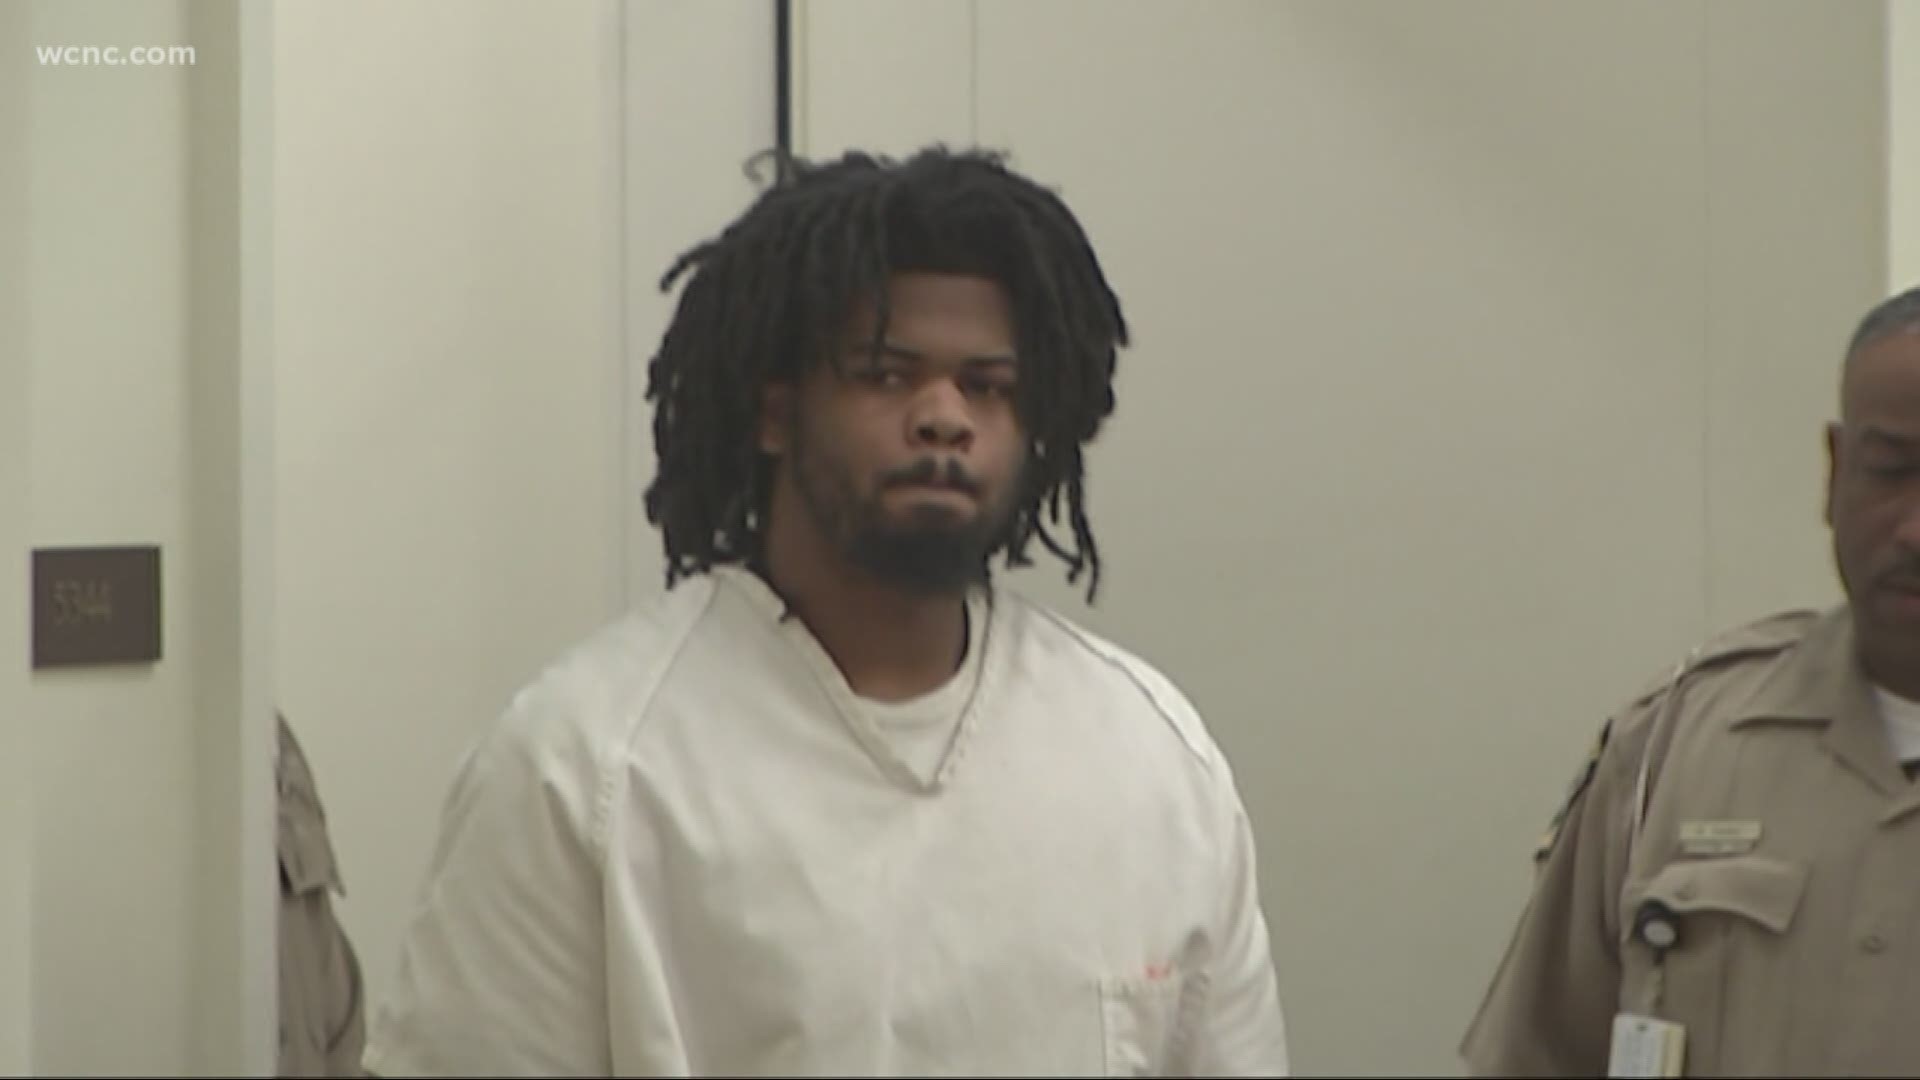 Opening statements are set to begin in the trial for Rayquan Borum, the man accused of shooting and killing a man during the 2016 riots in uptown Charlotte.